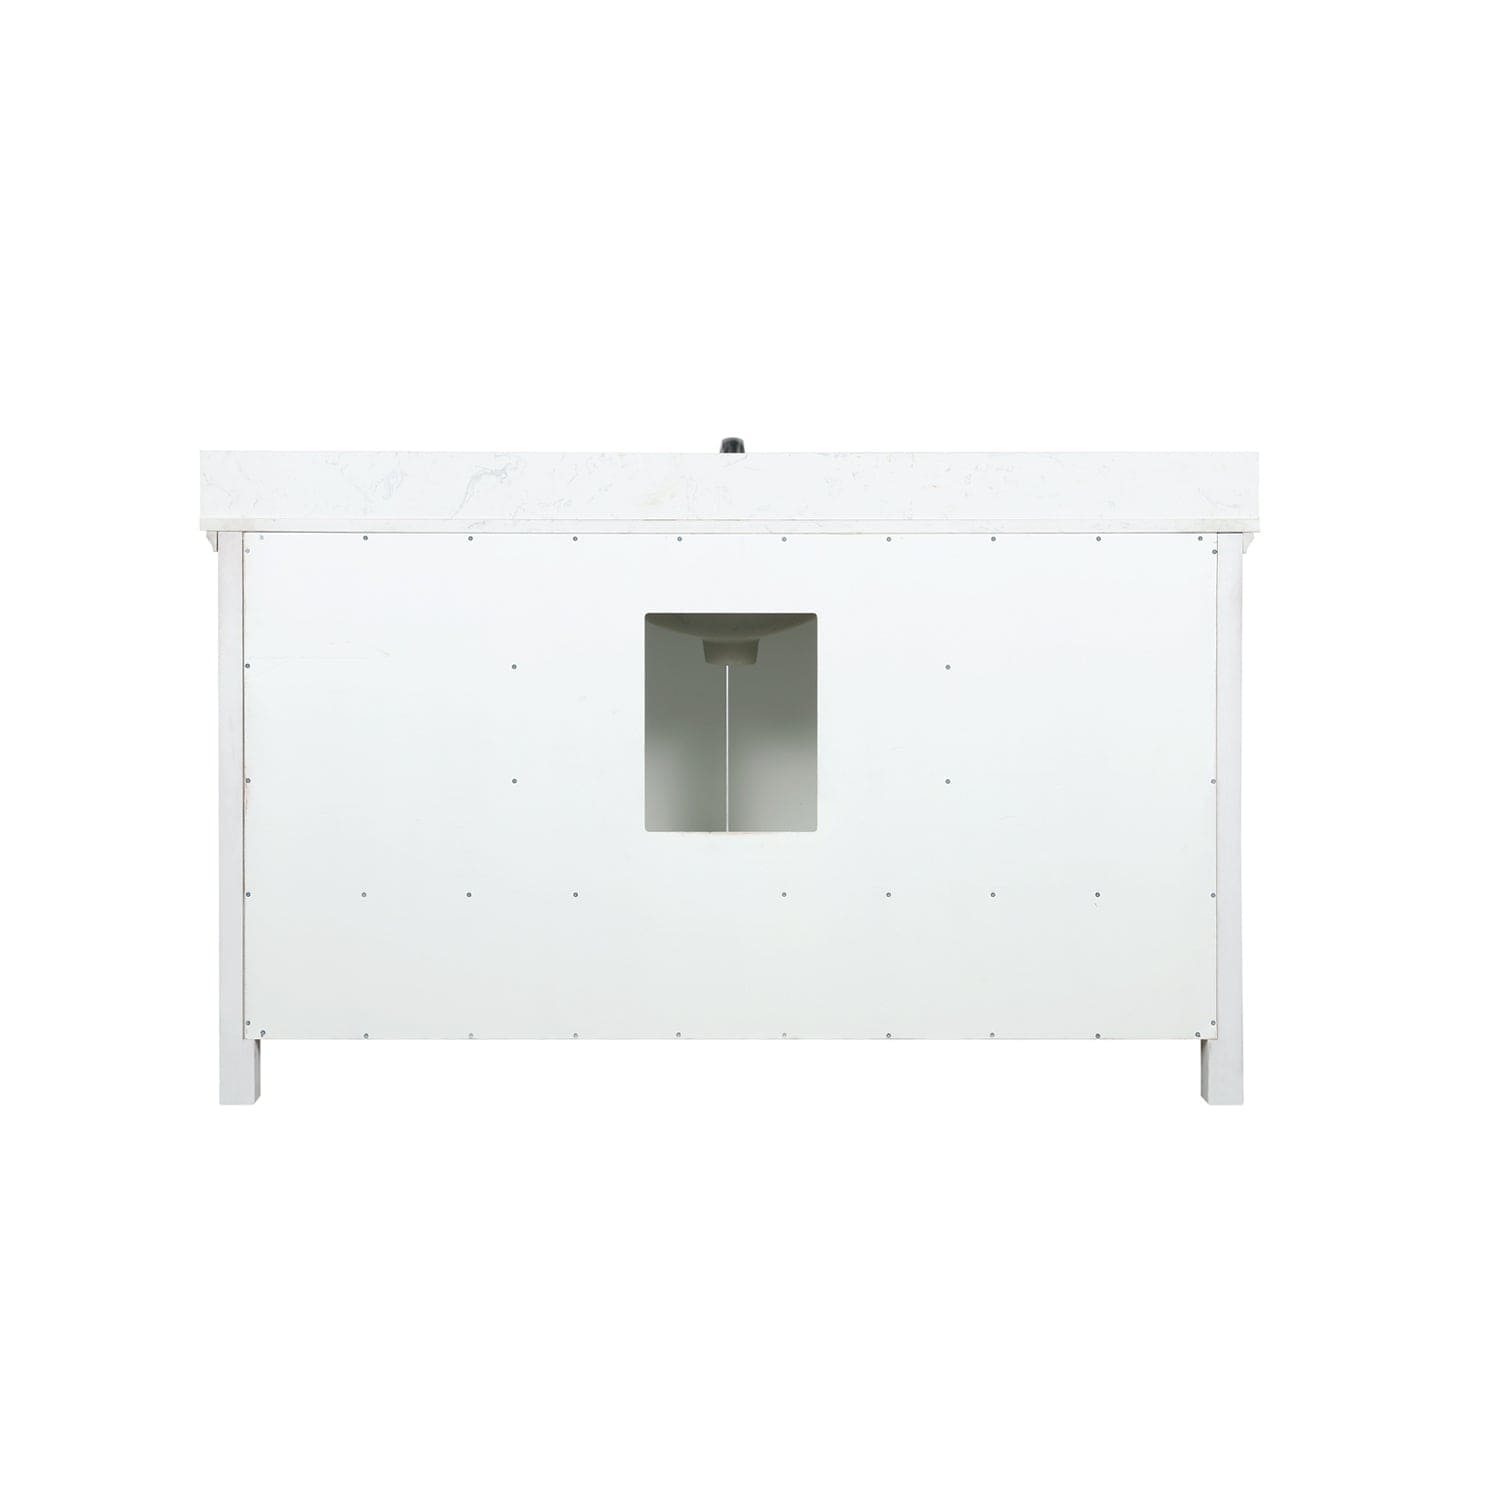 Altair Isla 60" Single Bathroom Vanity Set in White and Carrara White Marble Countertop without Mirror 538060S-WH-AW-NM - Molaix696952511369Vanity538060S-WH-AW-NM